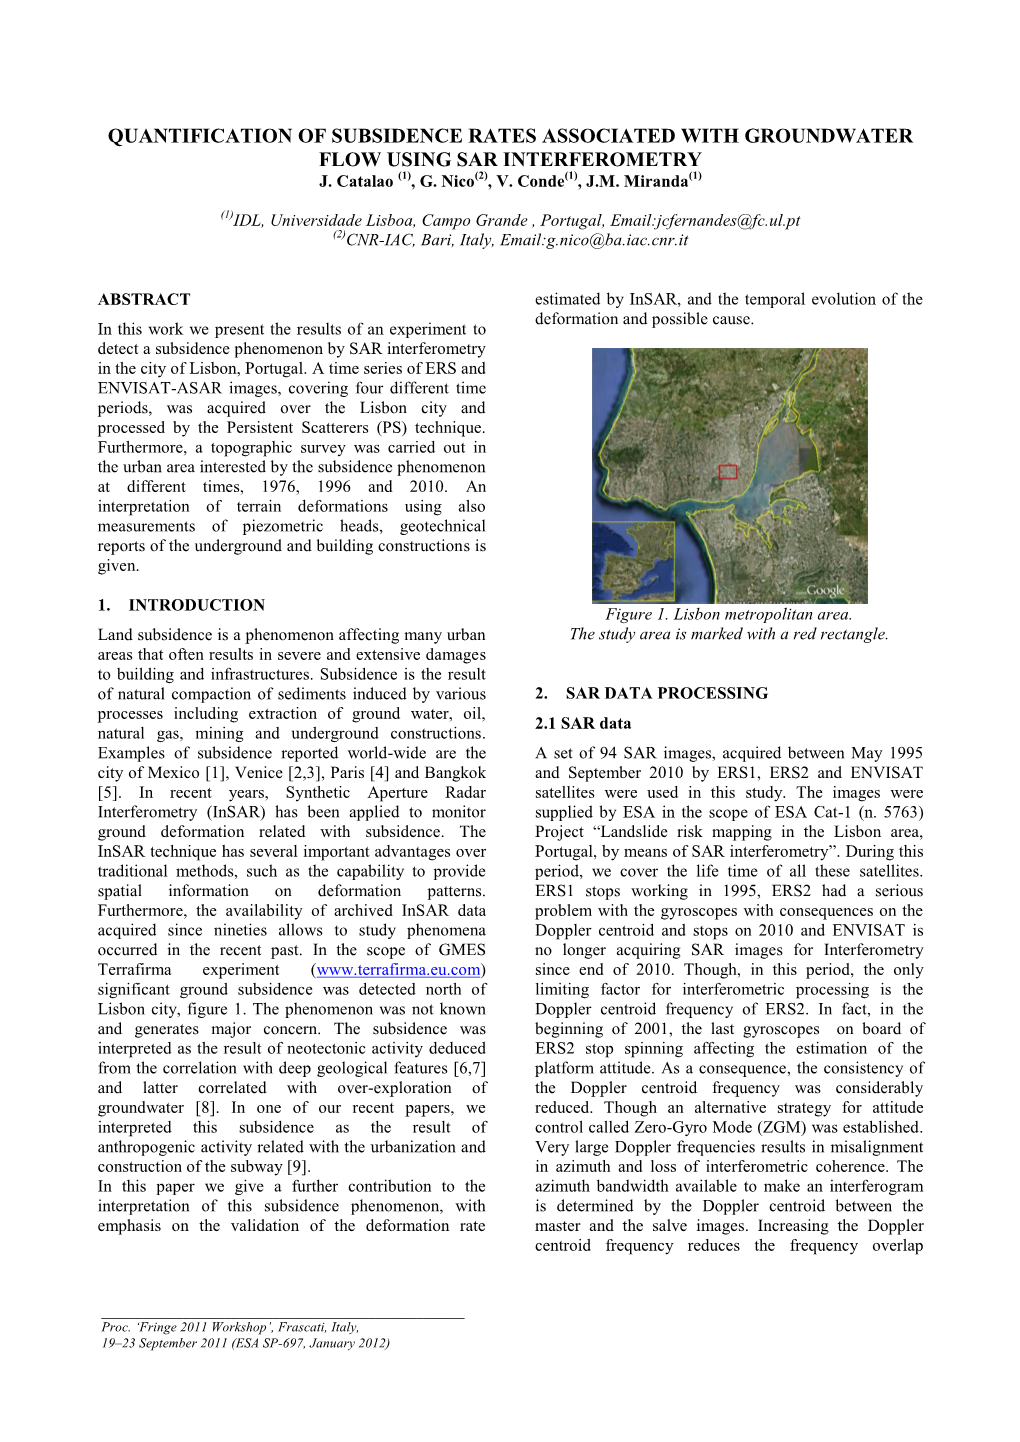 Quantification of Subsidence Rates Associated with Groundwater Flow Using Sar Interferometry J